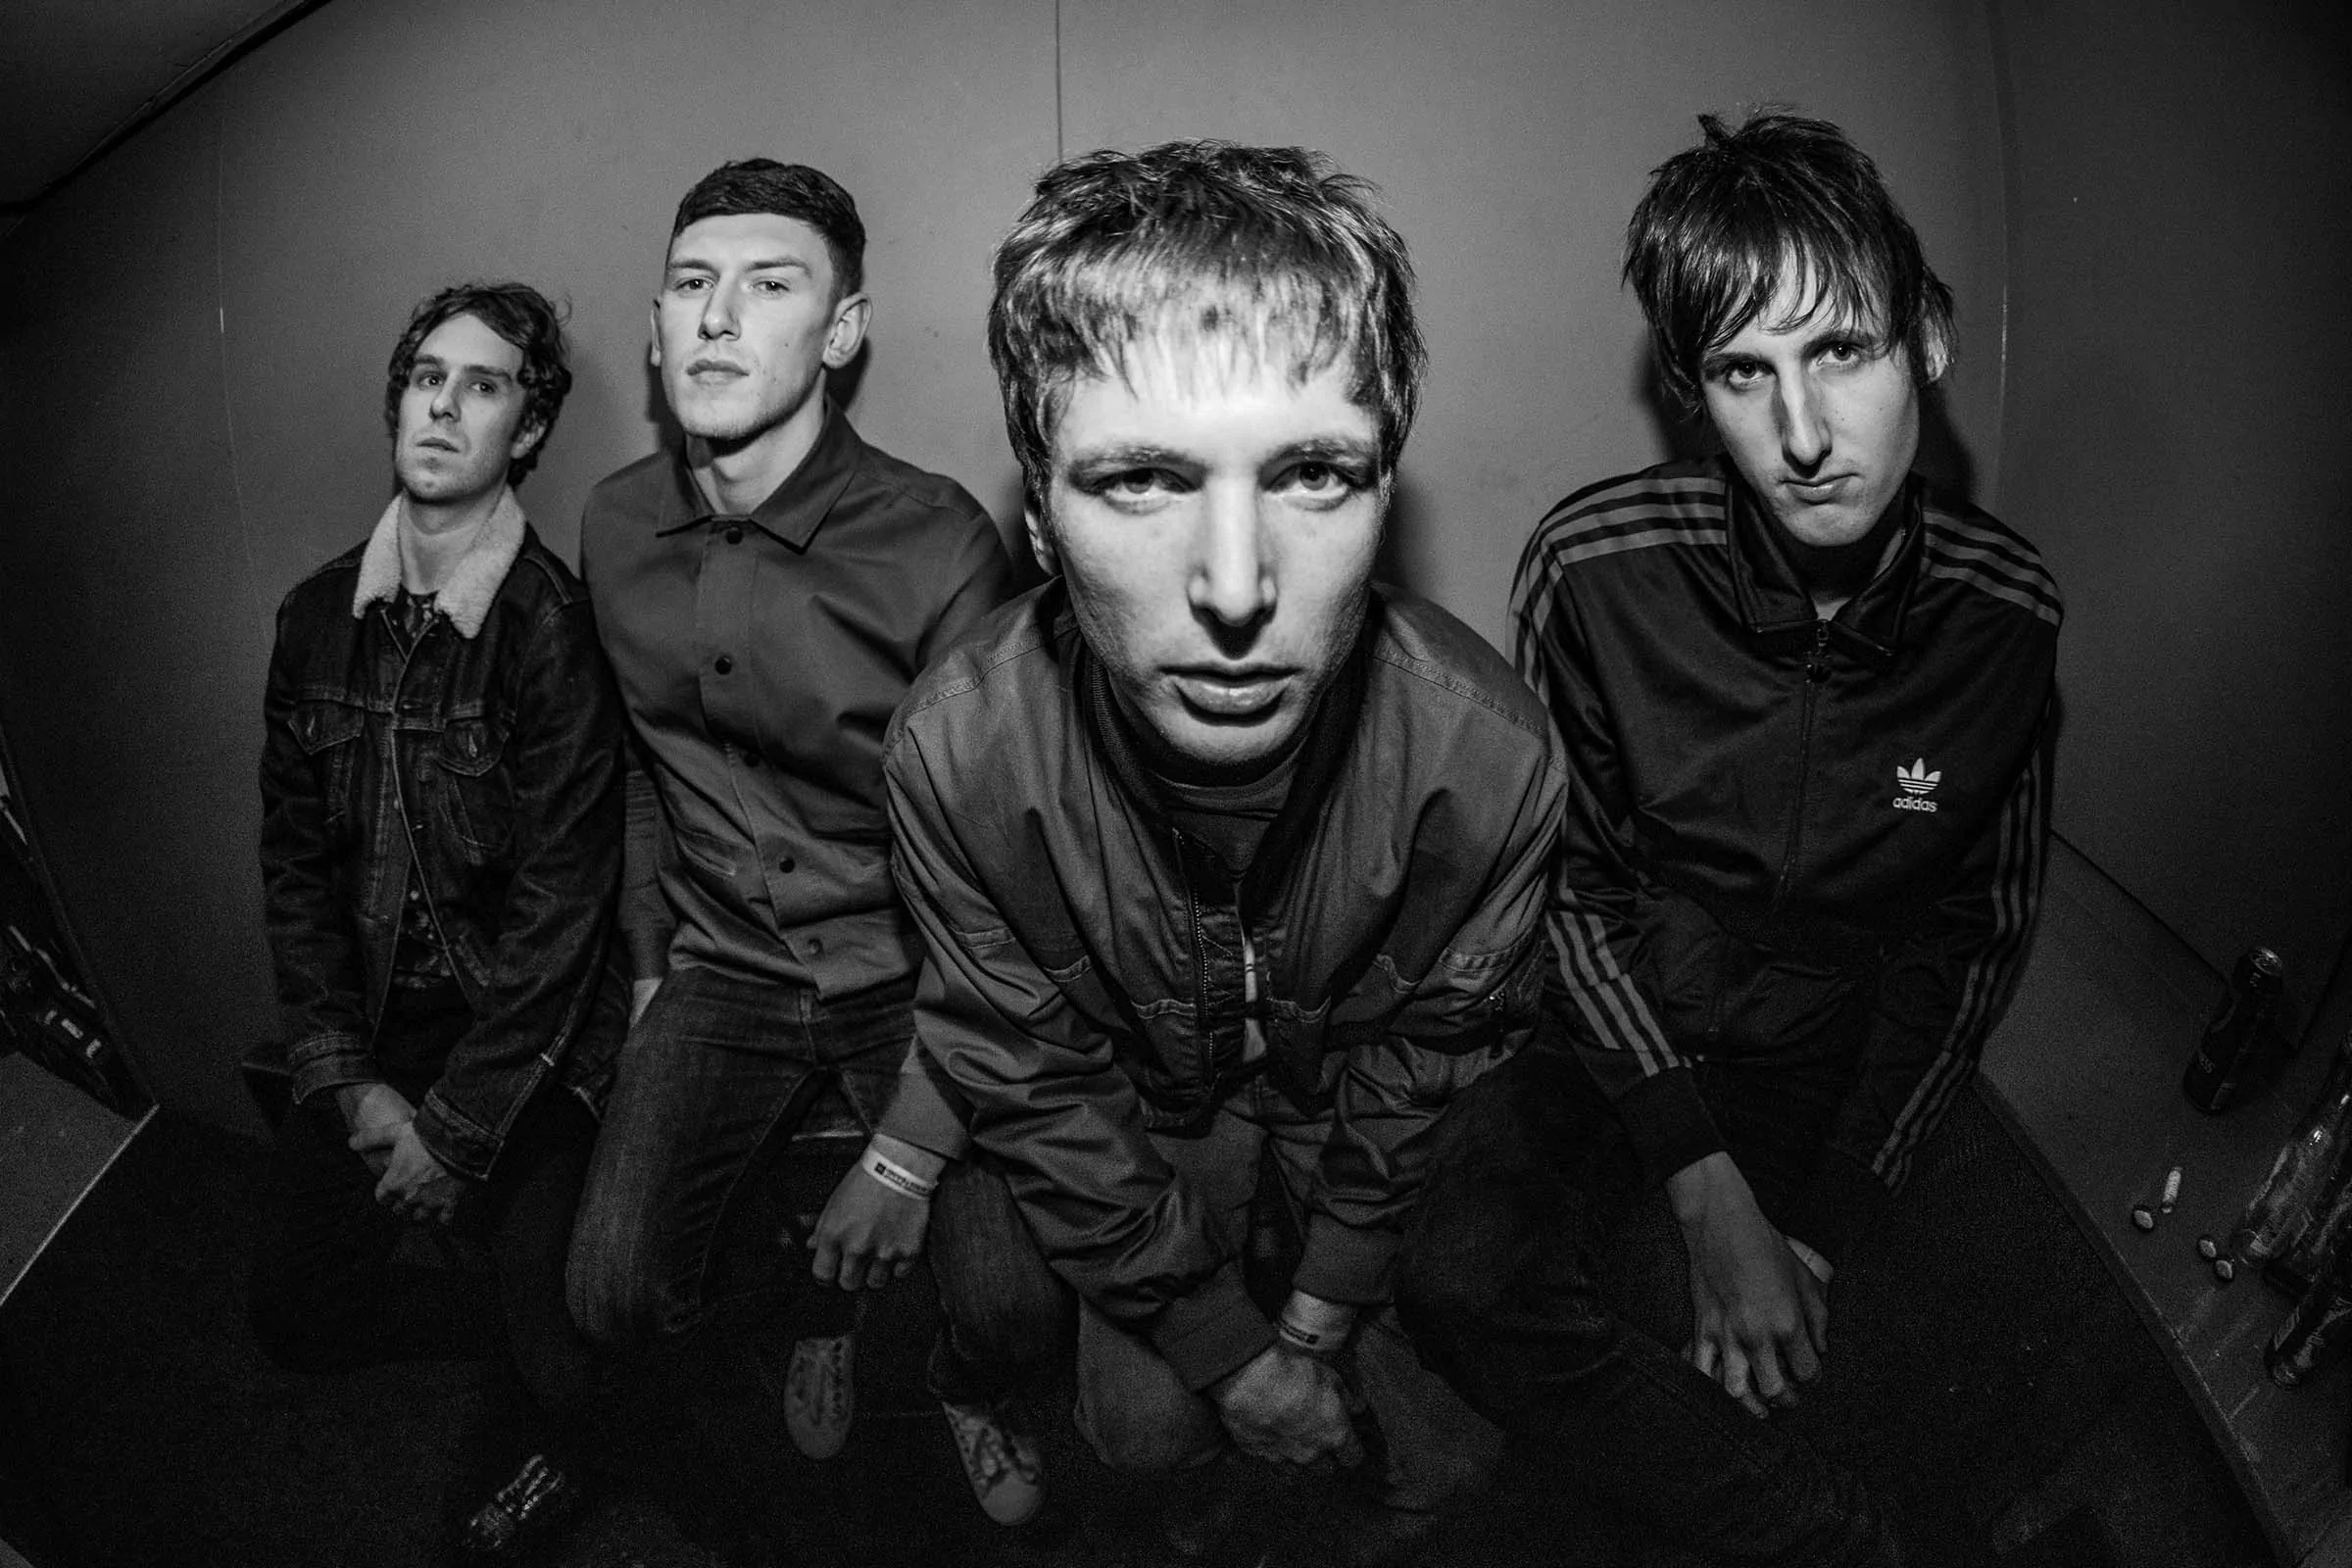 TWISTED WHEEL Announce third album ‘Satisfying The Ritual’ – out 20th March